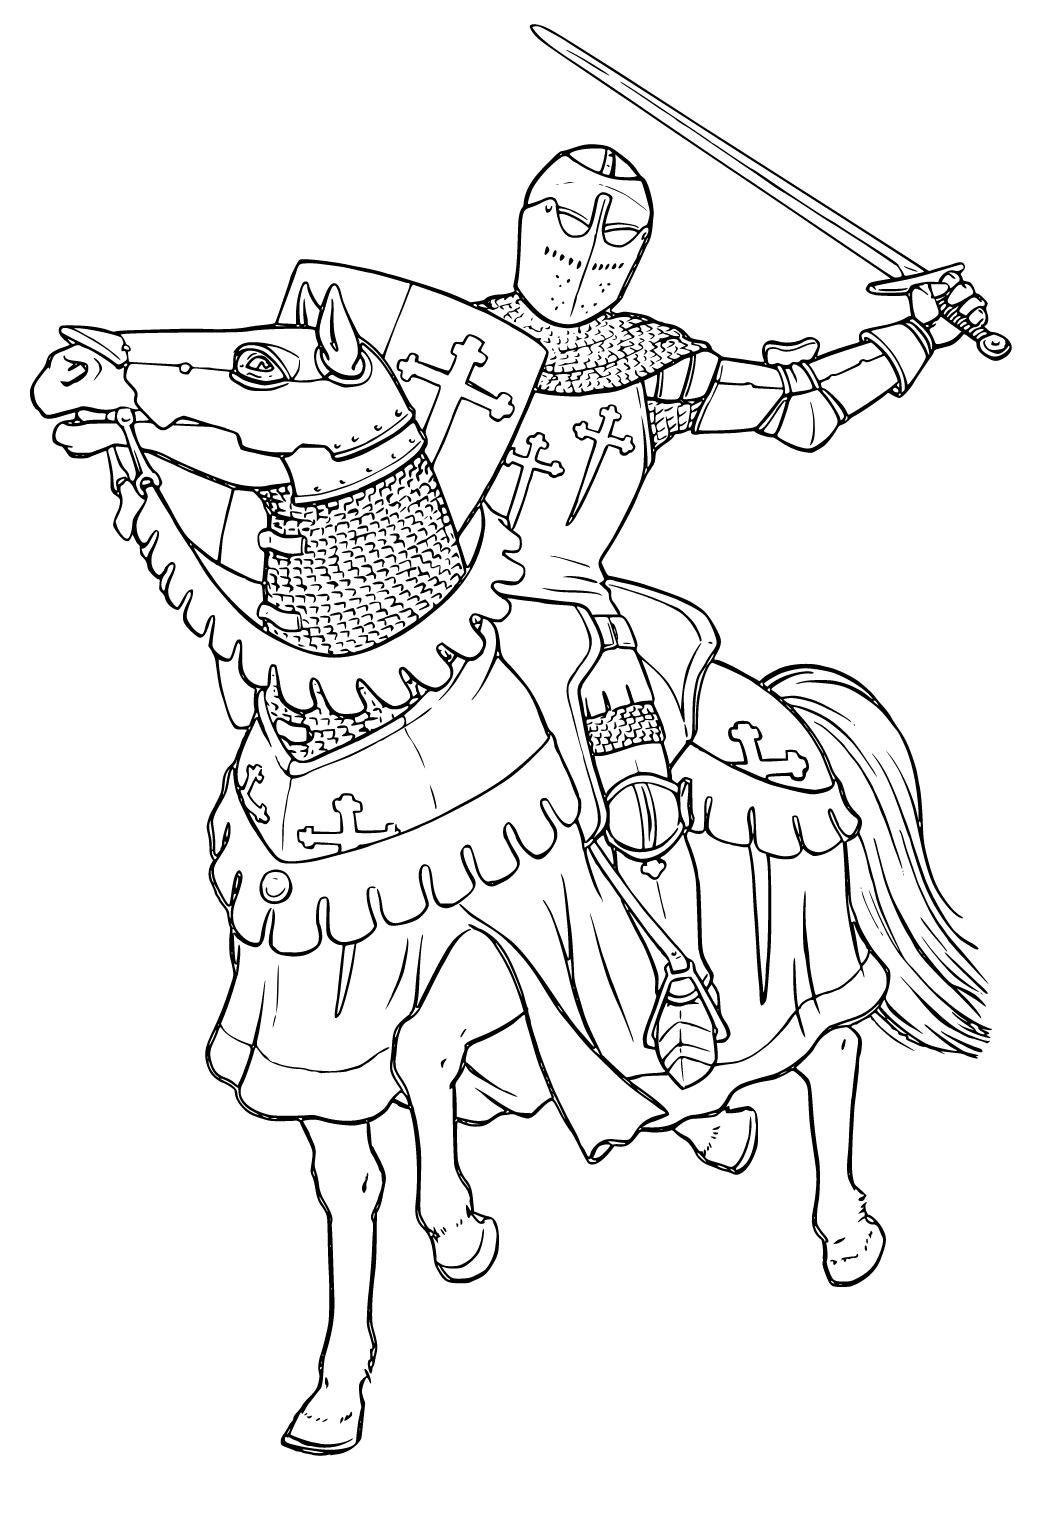 Free Printable Knight Rider Coloring Page for Adults and Kids - Lystok.com